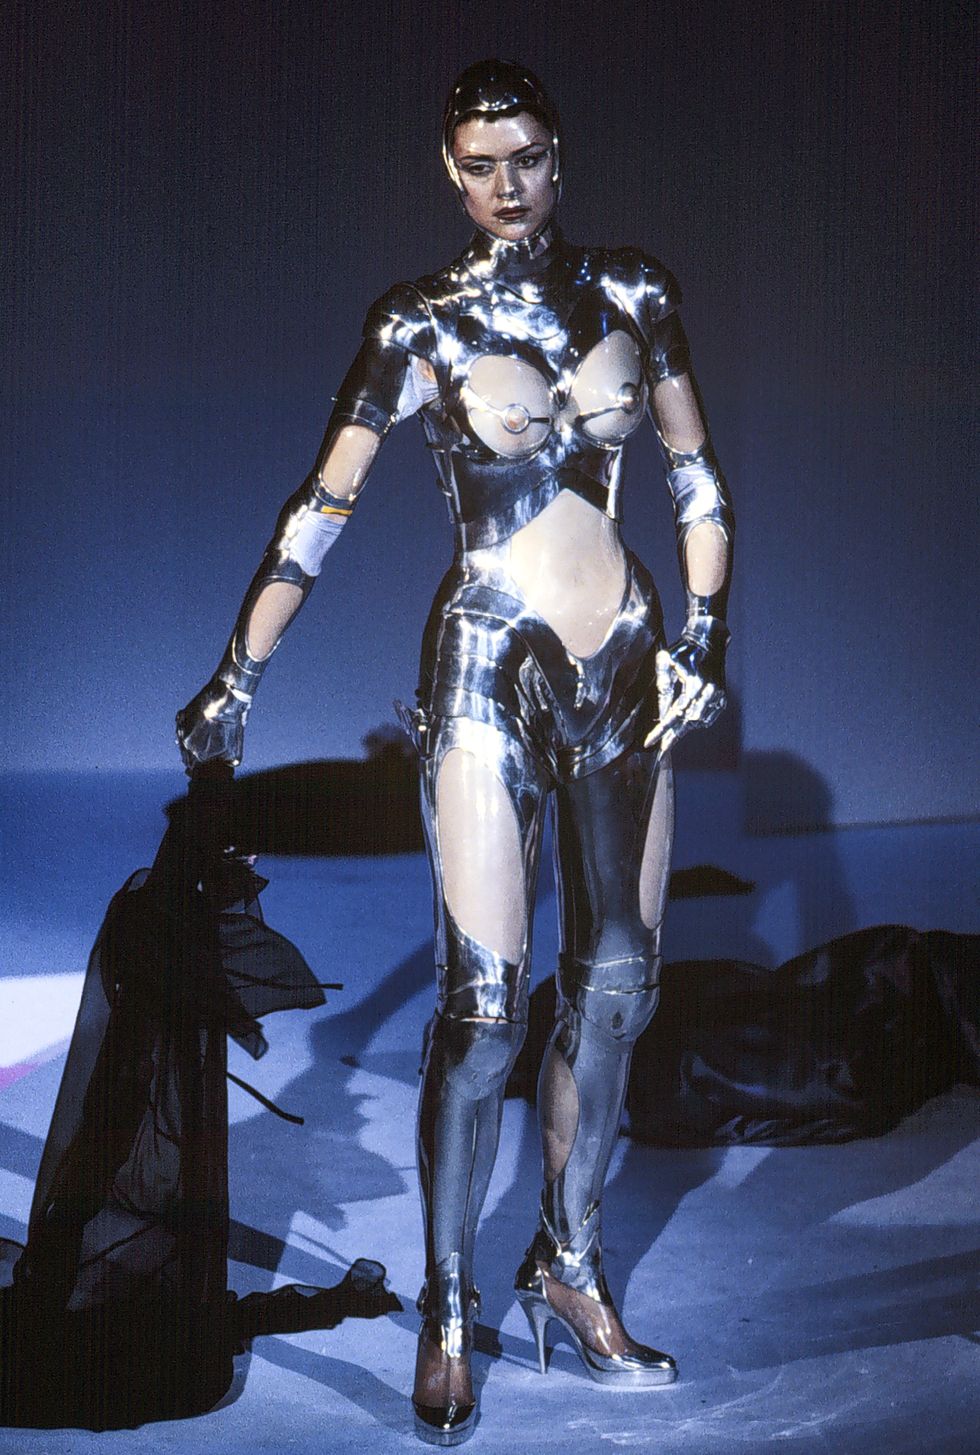 paris, france march 06 a model walks the runway during the thierry mugler ready to wear fallwinter 1995 1996 fashion show as part of the paris fashion week on march 6, 1995 in paris, france photo by victor virgilegamma rapho via getty images